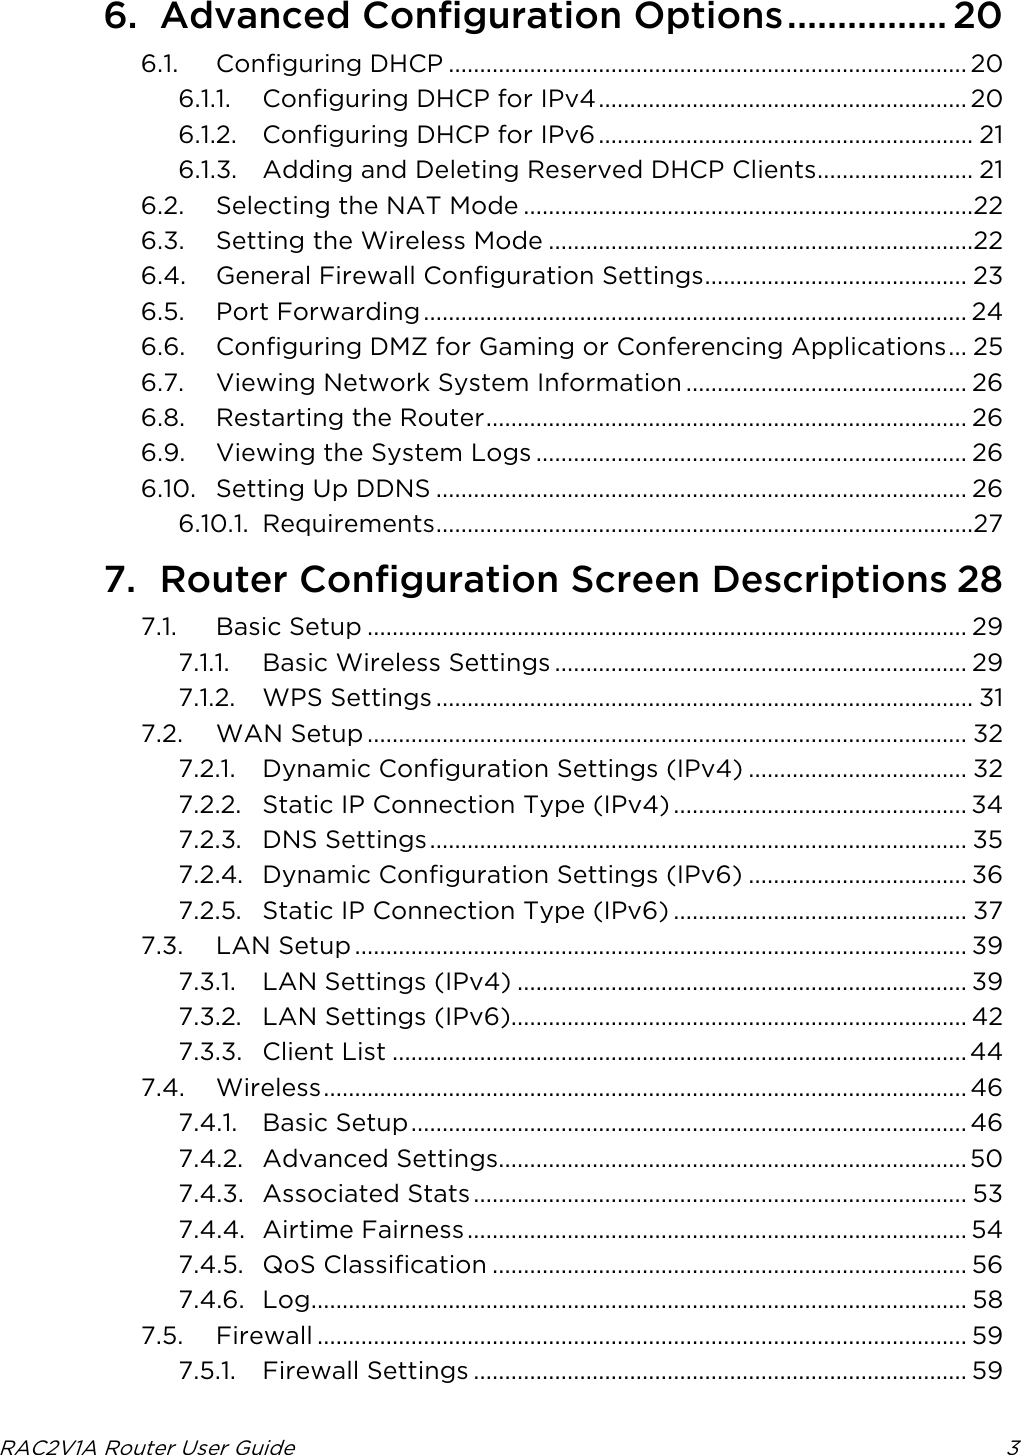  RAC2V1A Router User Guide  3  6. Advanced Configuration Options ................ 20 6.1. Configuring DHCP ................................................................................... 20 6.1.1. Configuring DHCP for IPv4 ........................................................... 20 6.1.2. Configuring DHCP for IPv6 ............................................................ 21 6.1.3. Adding and Deleting Reserved DHCP Clients ......................... 21 6.2. Selecting the NAT Mode ........................................................................22 6.3. Setting the Wireless Mode ....................................................................22 6.4. General Firewall Configuration Settings .......................................... 23 6.5. Port Forwarding ....................................................................................... 24 6.6. Configuring DMZ for Gaming or Conferencing Applications ... 25 6.7. Viewing Network System Information ............................................. 26 6.8. Restarting the Router ............................................................................. 26 6.9. Viewing the System Logs ..................................................................... 26 6.10. Setting Up DDNS ..................................................................................... 26 6.10.1. Requirements ......................................................................................27 7. Router Configuration Screen Descriptions 28 7.1. Basic Setup ................................................................................................ 29 7.1.1. Basic Wireless Settings .................................................................. 29 7.1.2. WPS Settings ...................................................................................... 31 7.2. WAN Setup ................................................................................................ 32 7.2.1. Dynamic Configuration Settings (IPv4) ................................... 32 7.2.2. Static IP Connection Type (IPv4) ............................................... 34 7.2.3. DNS Settings ...................................................................................... 35 7.2.4. Dynamic Configuration Settings (IPv6) ................................... 36 7.2.5. Static IP Connection Type (IPv6) ............................................... 37 7.3. LAN Setup .................................................................................................. 39 7.3.1. LAN Settings (IPv4) ........................................................................ 39 7.3.2. LAN Settings (IPv6)......................................................................... 42 7.3.3. Client List ............................................................................................ 44 7.4. Wireless ....................................................................................................... 46 7.4.1. Basic Setup ......................................................................................... 46 7.4.2. Advanced Settings........................................................................... 50 7.4.3. Associated Stats ............................................................................... 53 7.4.4. Airtime Fairness ................................................................................ 54 7.4.5. QoS Classification ............................................................................ 56 7.4.6. Log ......................................................................................................... 58 7.5. Firewall ........................................................................................................ 59 7.5.1. Firewall Settings ............................................................................... 59 